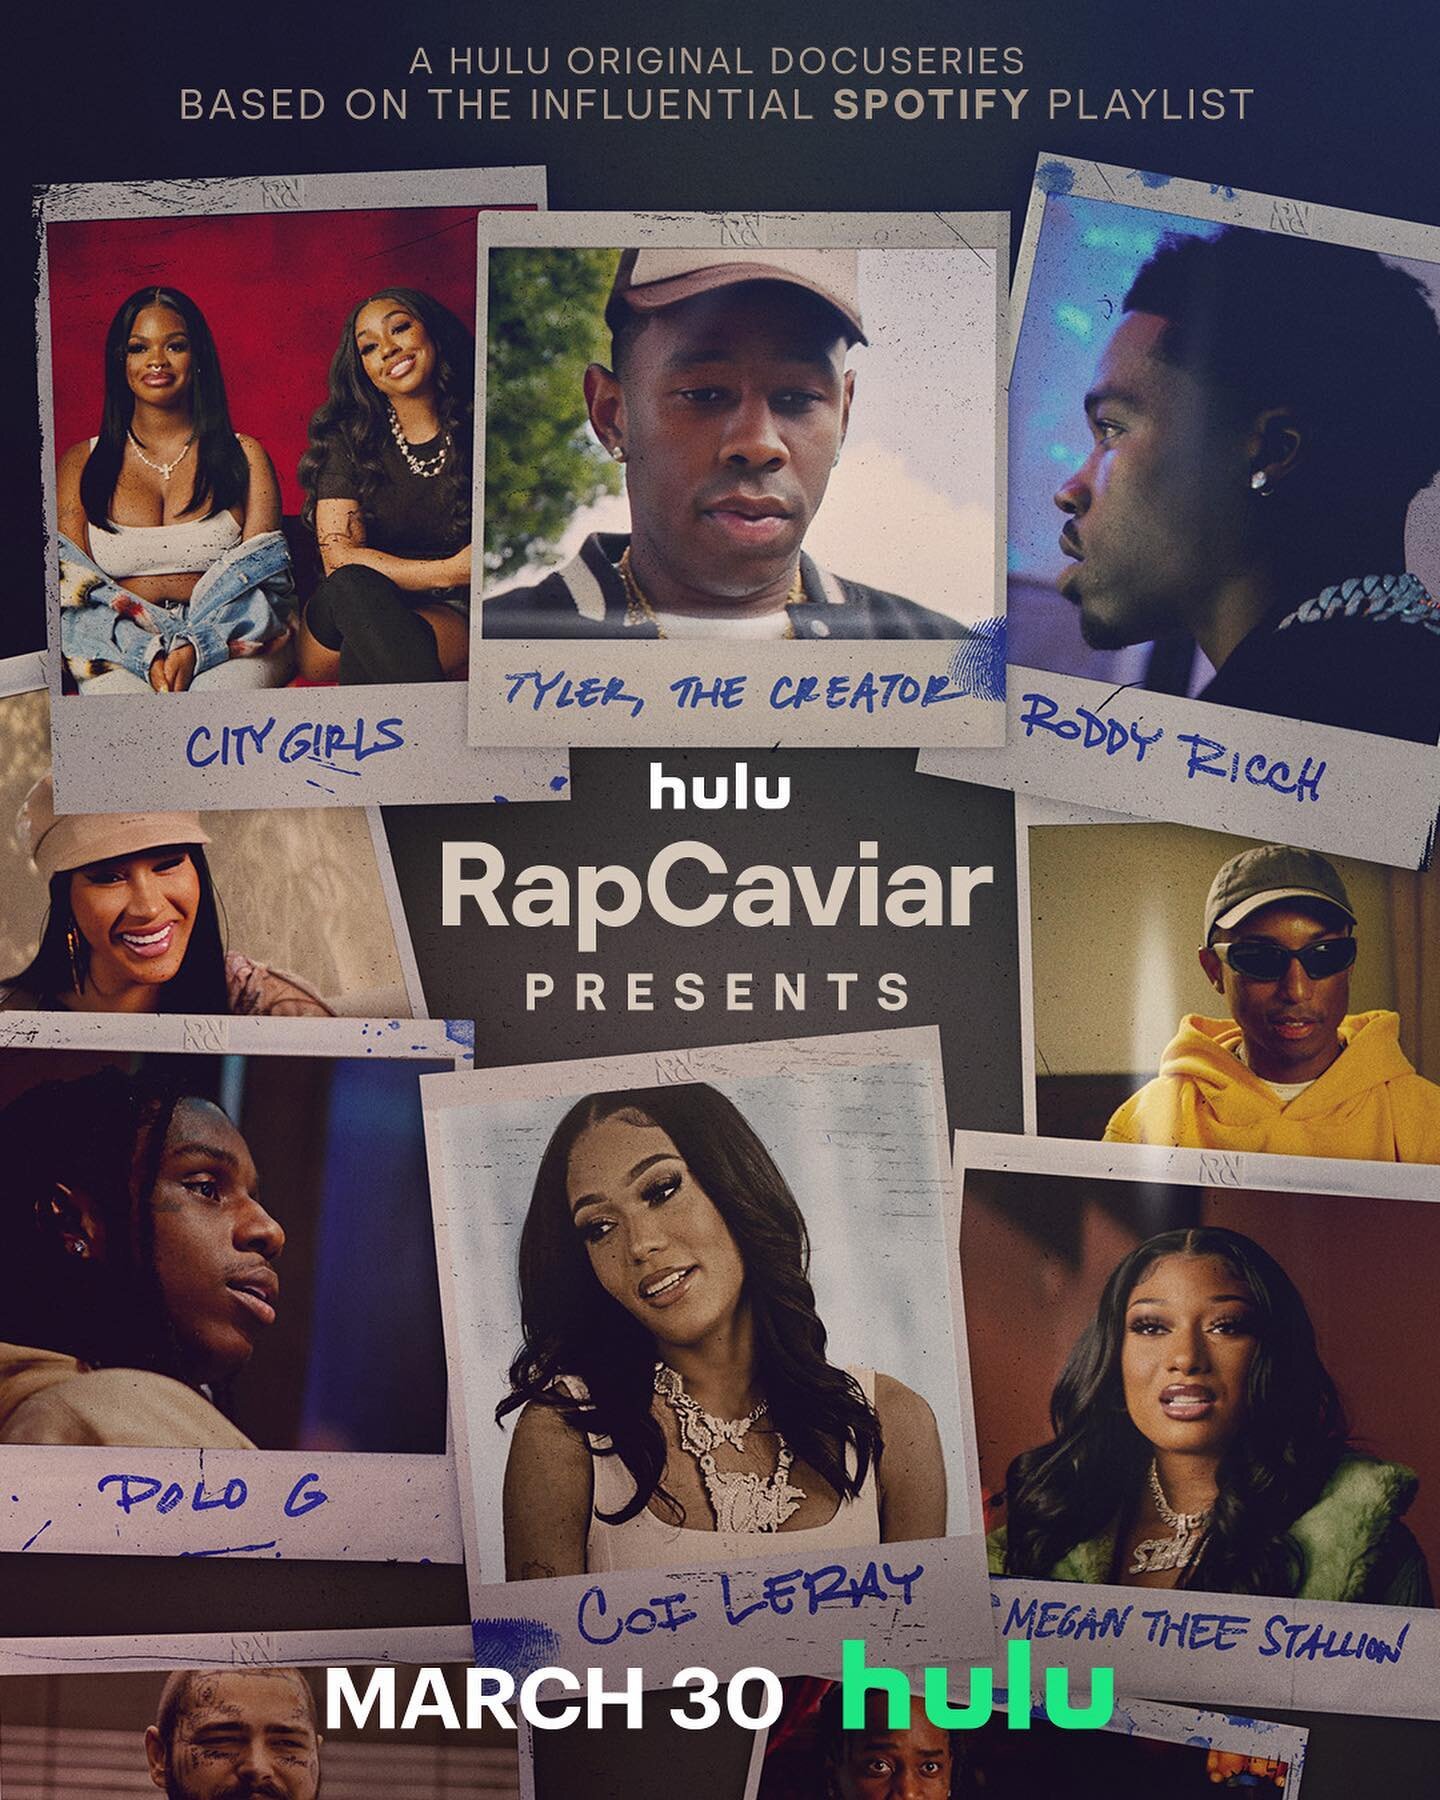 It&rsquo;s an absolute honor to be a part of @spotify and @hulu&rsquo;s new documentary series based on the influential Rap Caviar playlist. 

Providing social and cultural analysis to my
music coverage through writing and on-air commentary over the 